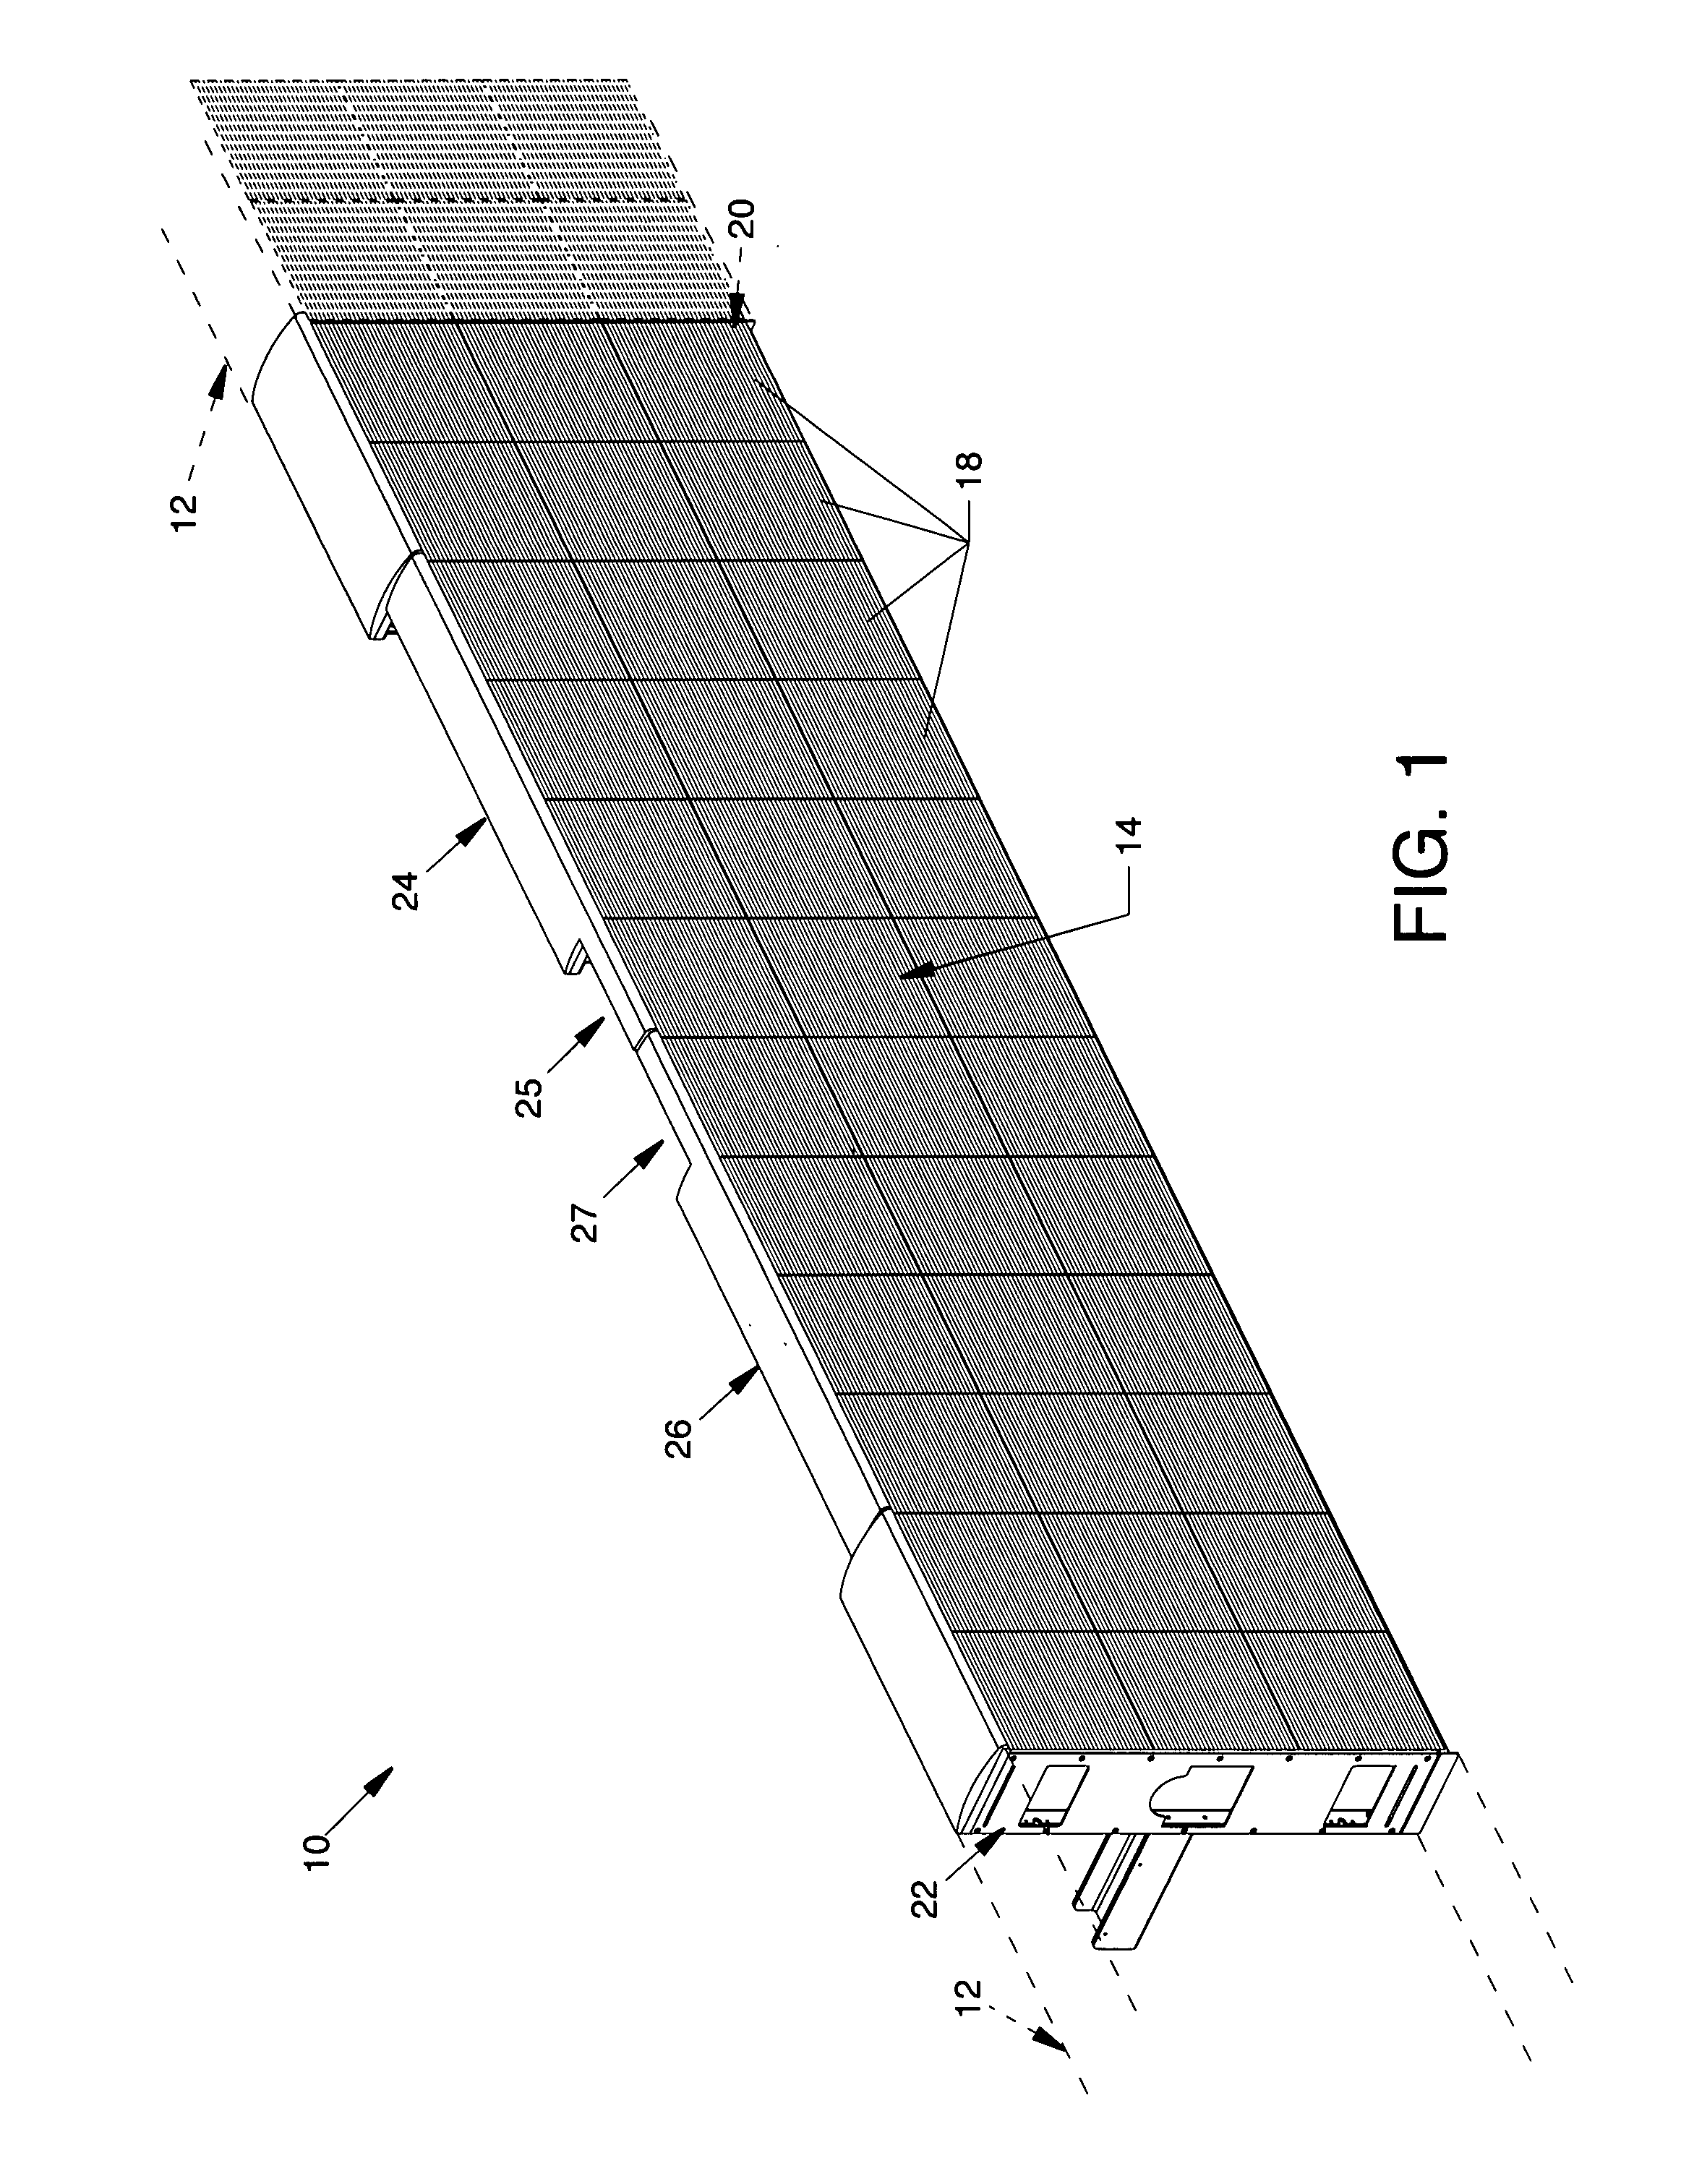 Safety gate system having an electronic display